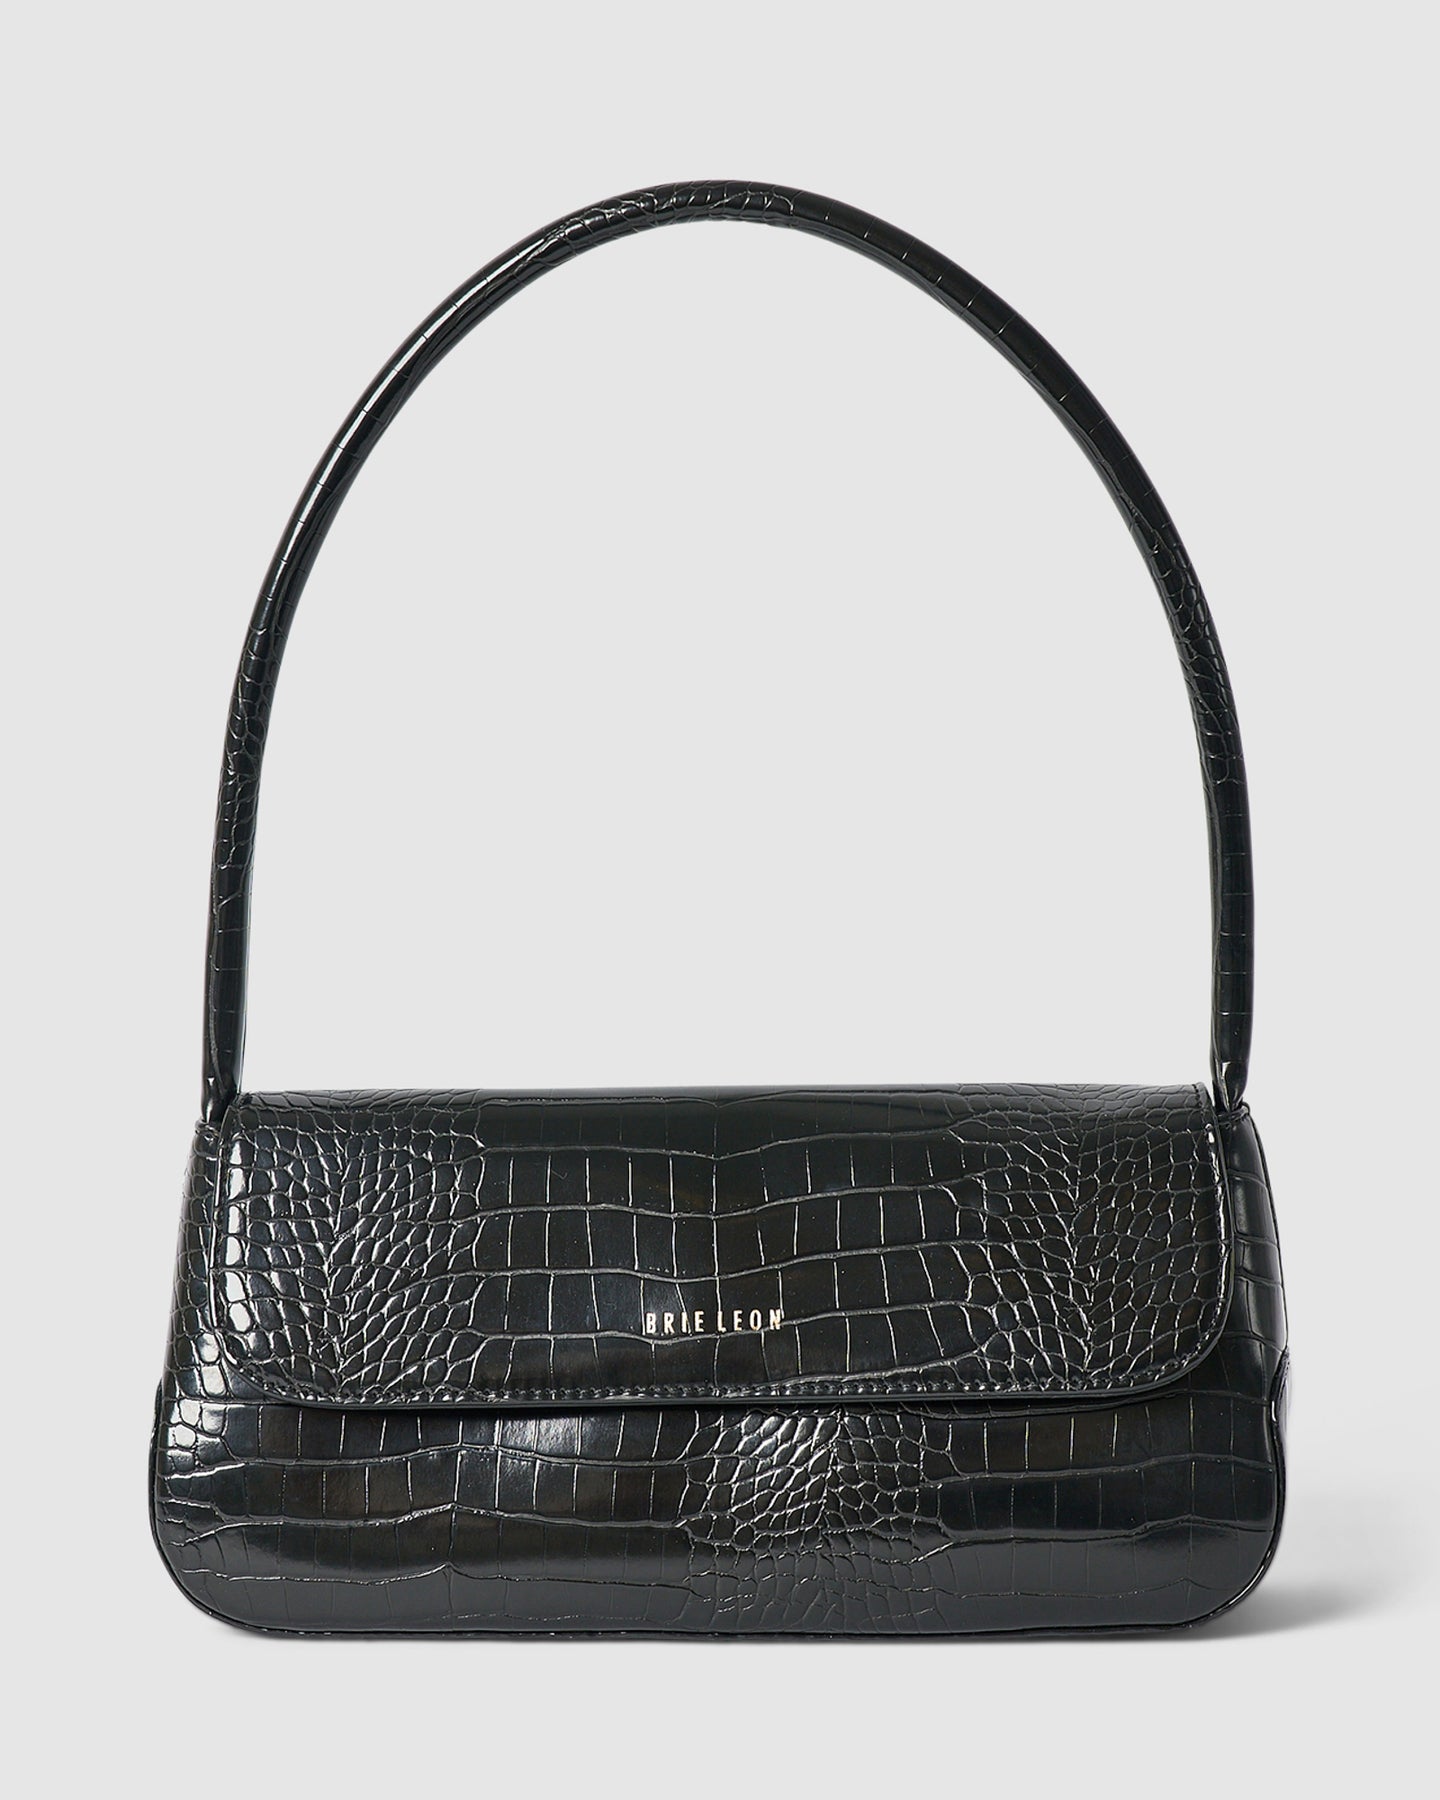 The Camille Bag in Black Brushed Recycled Croc by BRIE LEON